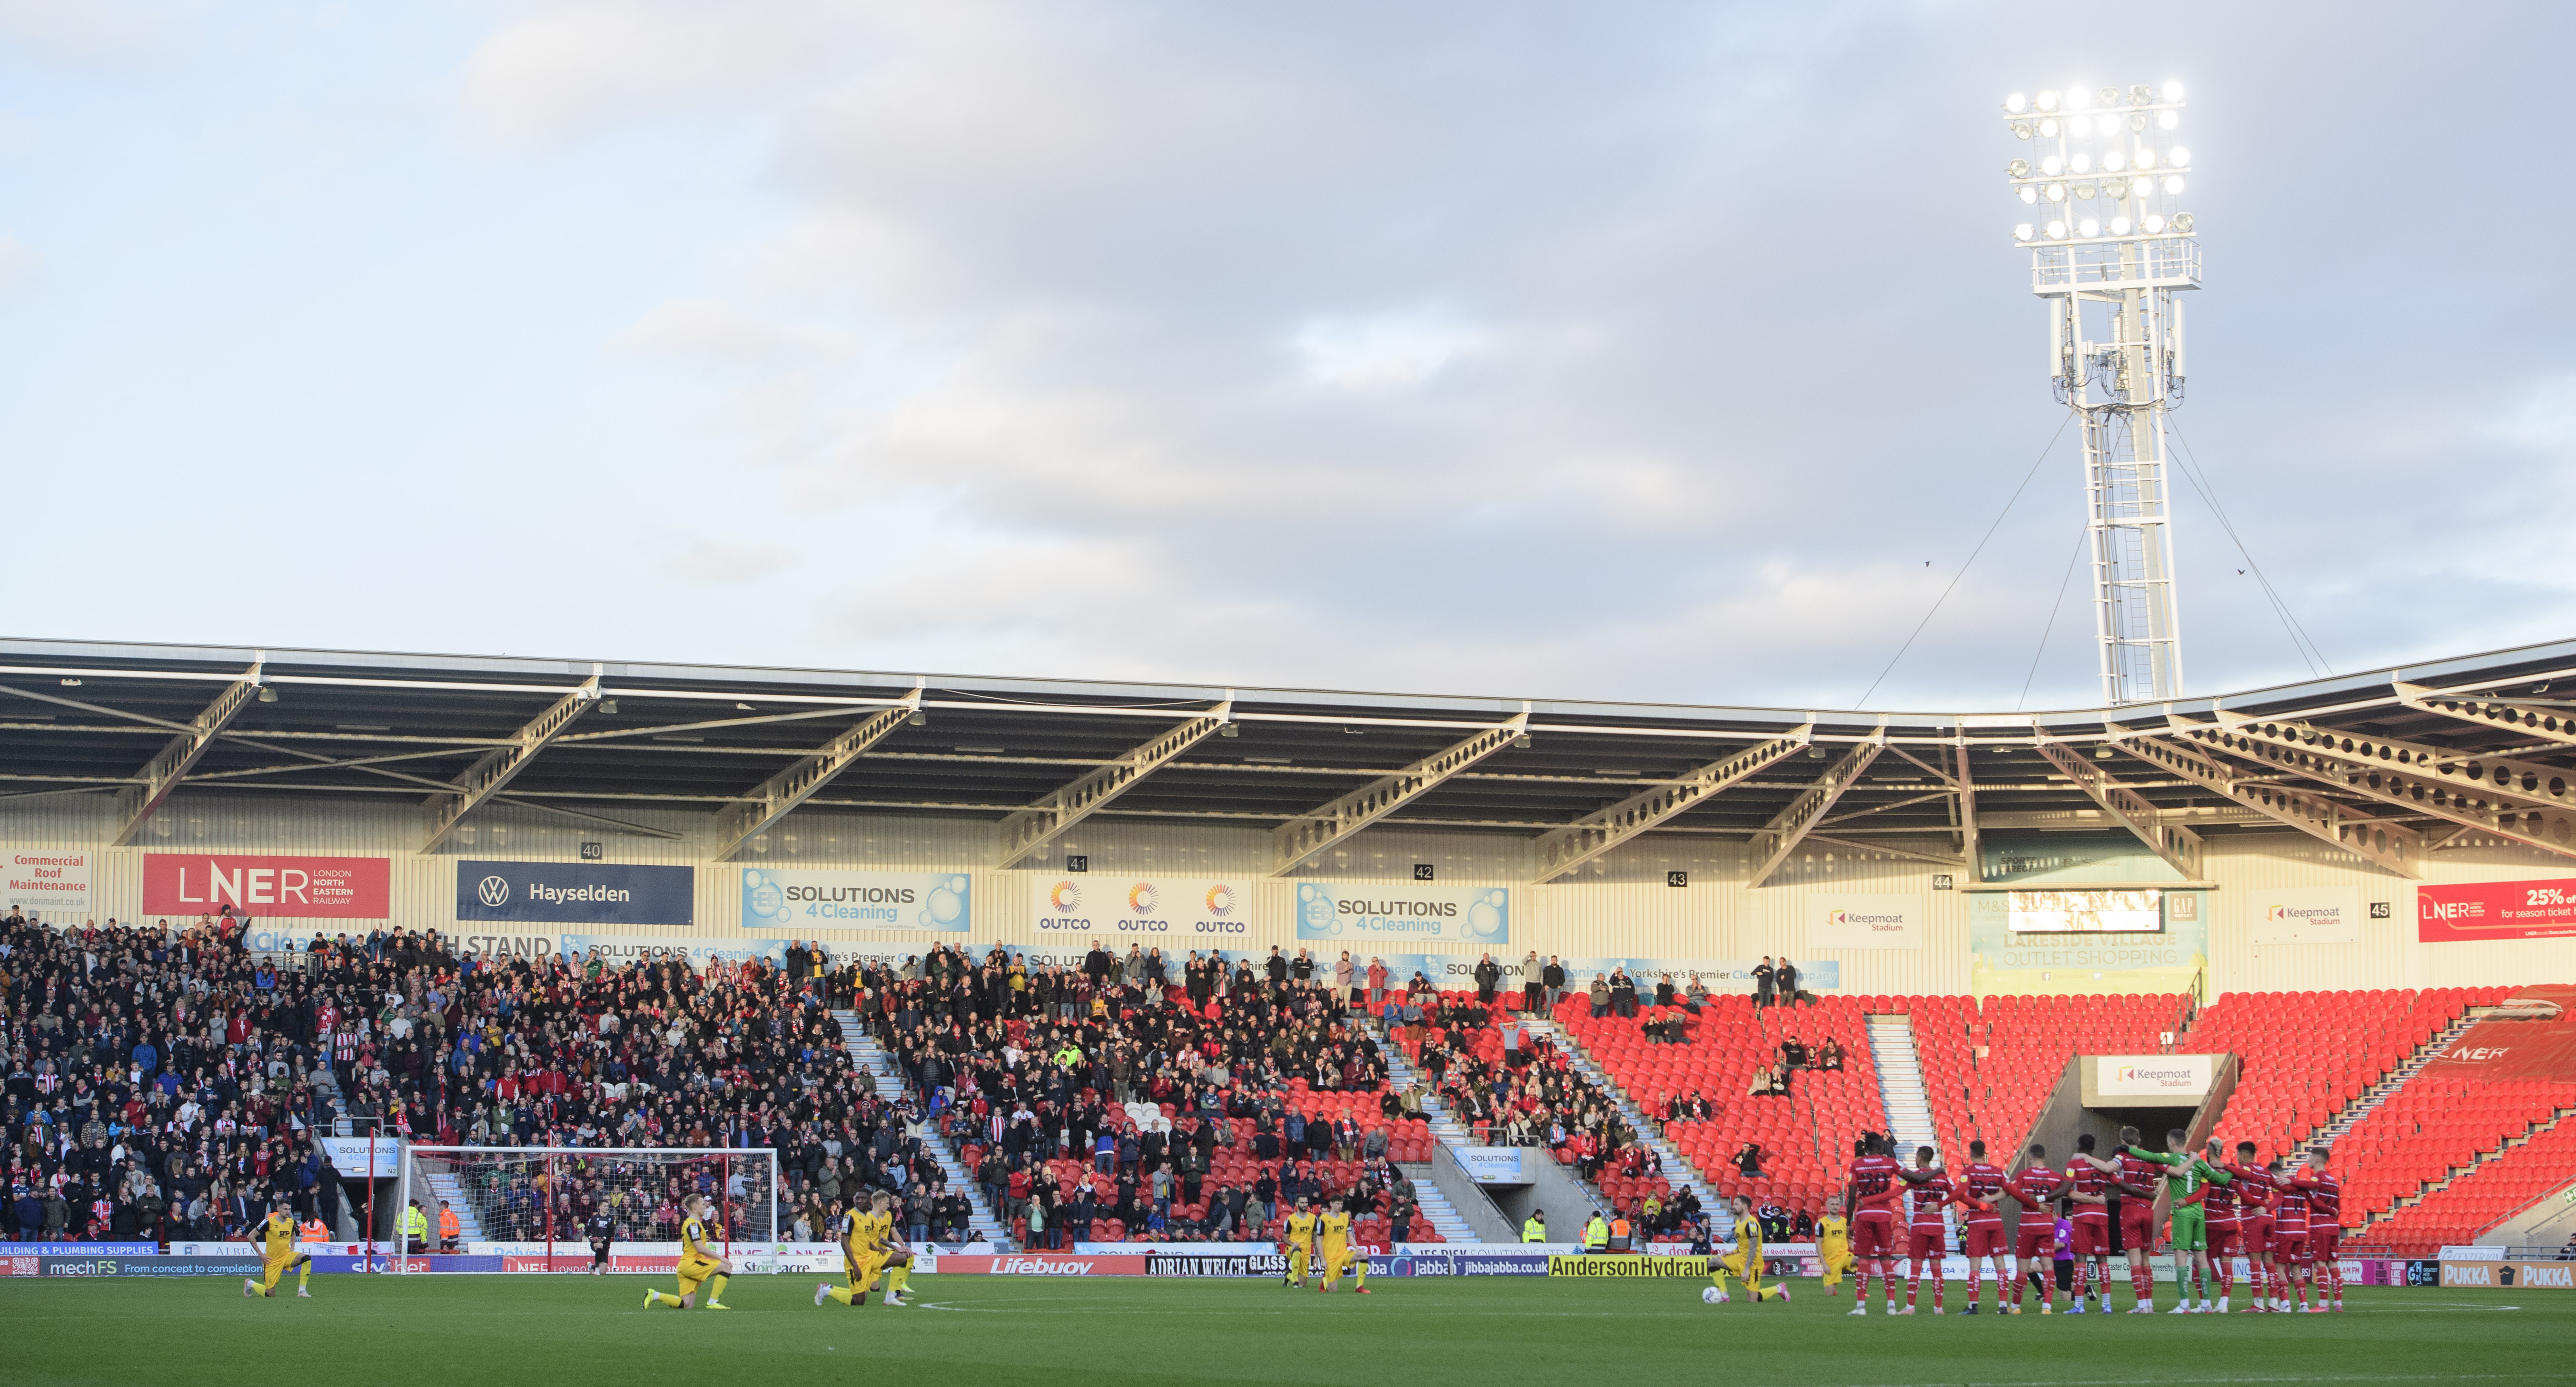 Doncaster Rovers v Lincoln City - Sky Bet League One